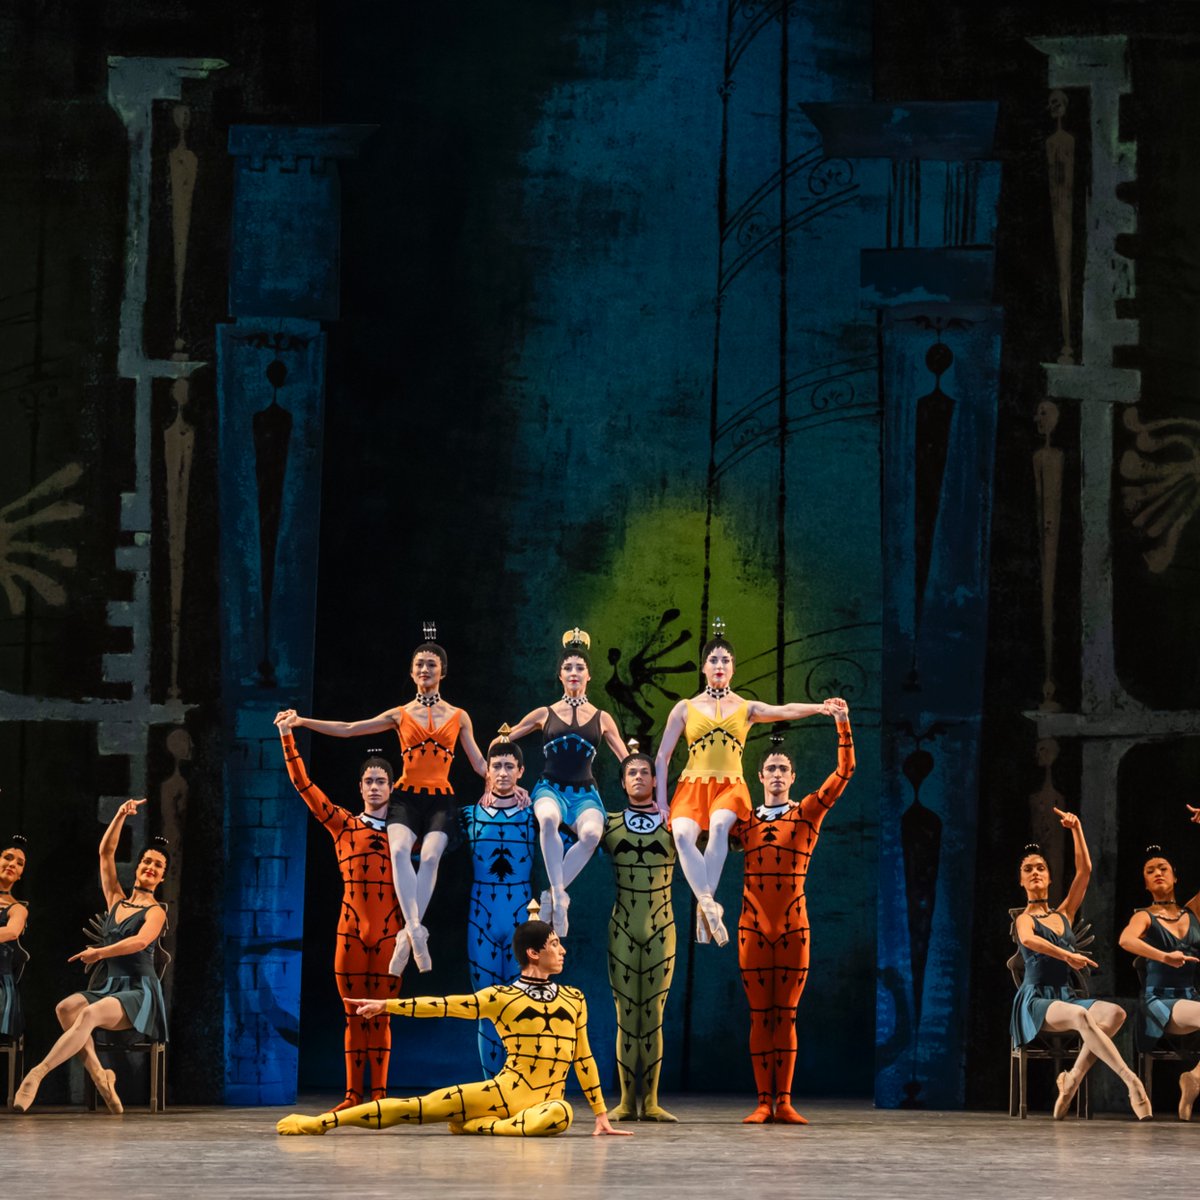 From a kaleidoscopic abstract ballet to a poignant elegy, celebrate Kenneth MacMillan’s endless invention 🩰 There are just two performances left of Danses concertantes / Different Drummer / Requiem - don't miss out on seeing three unique works: bit.ly/4bAXRUz